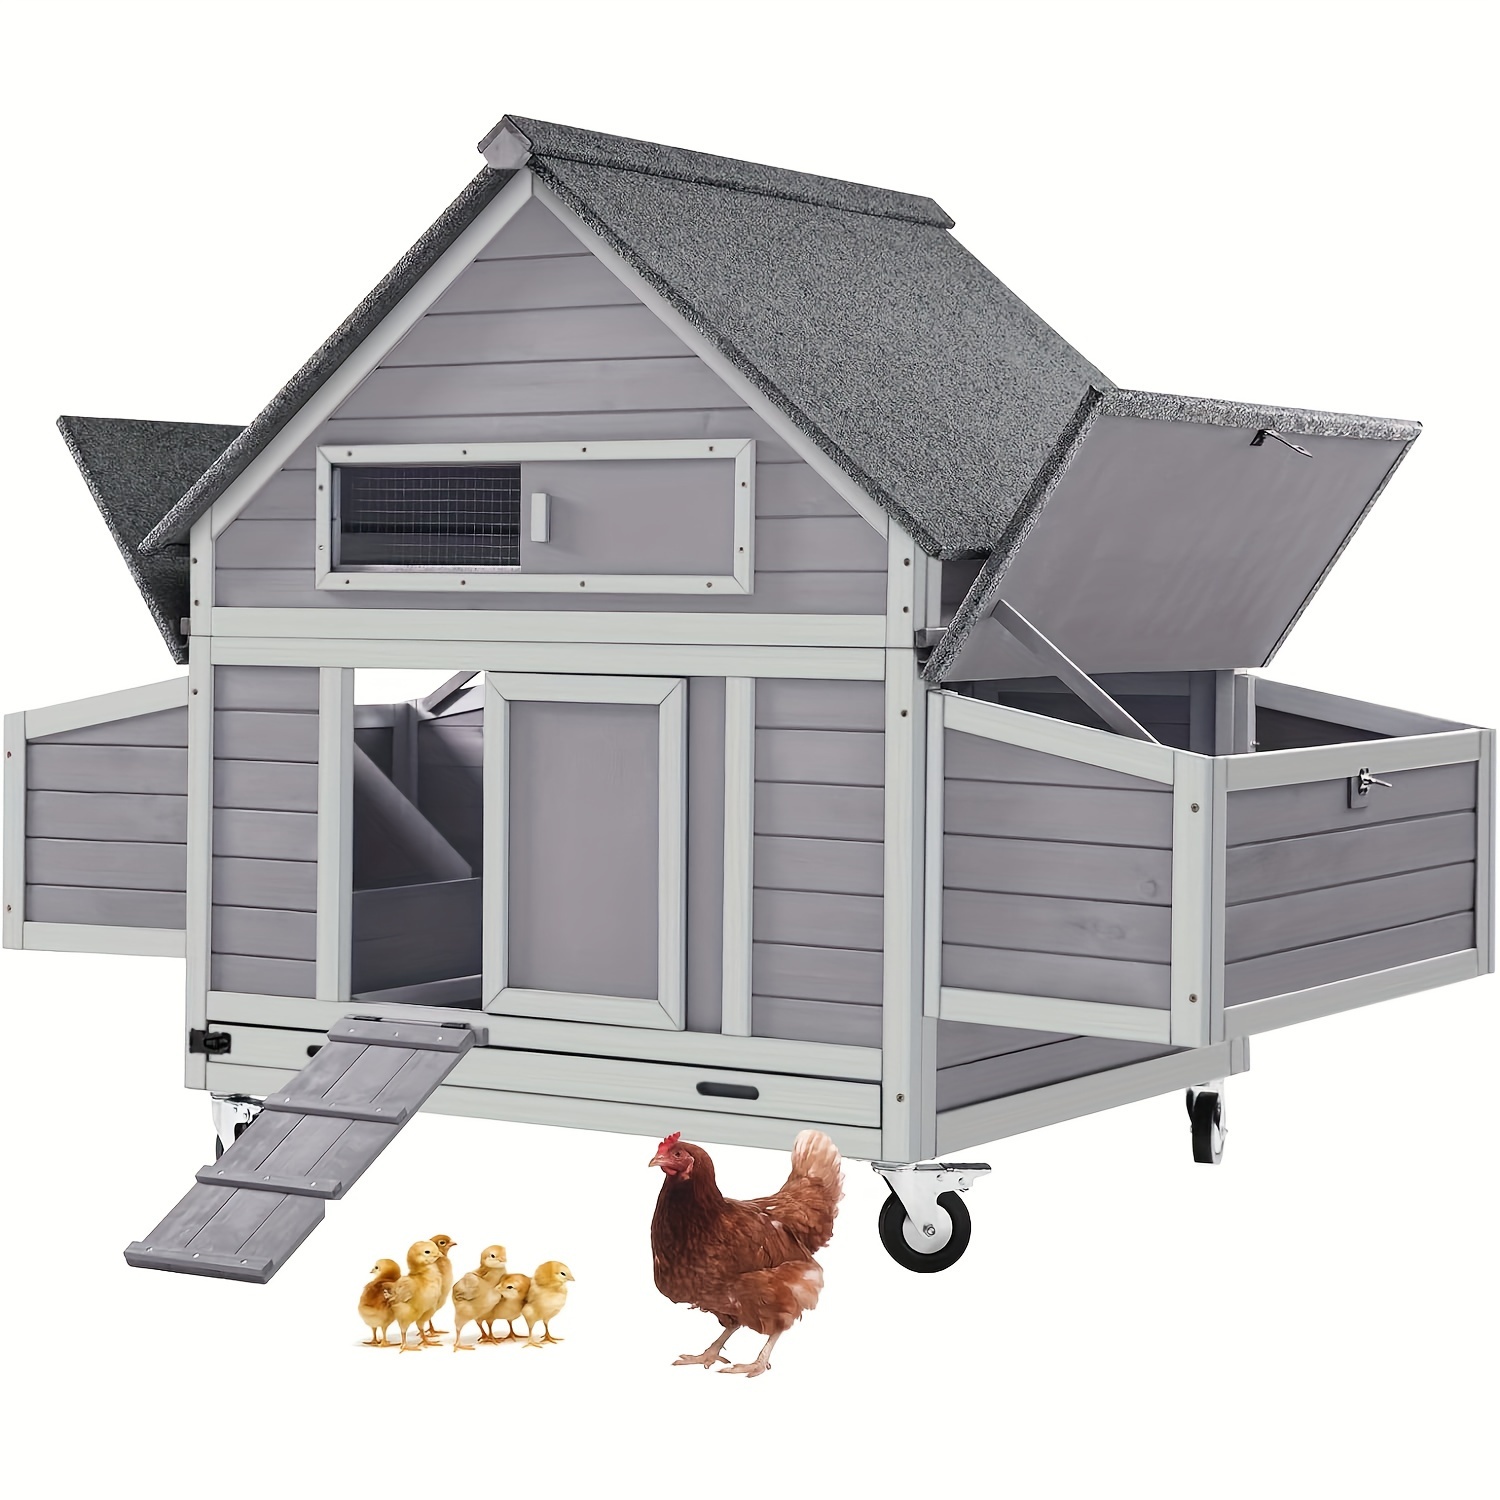 

Aivituvin Chicken Coop, Outdoor Wooden Hen House With 2 Nesting Boxes, Movable Large Duck Cage On Wheels